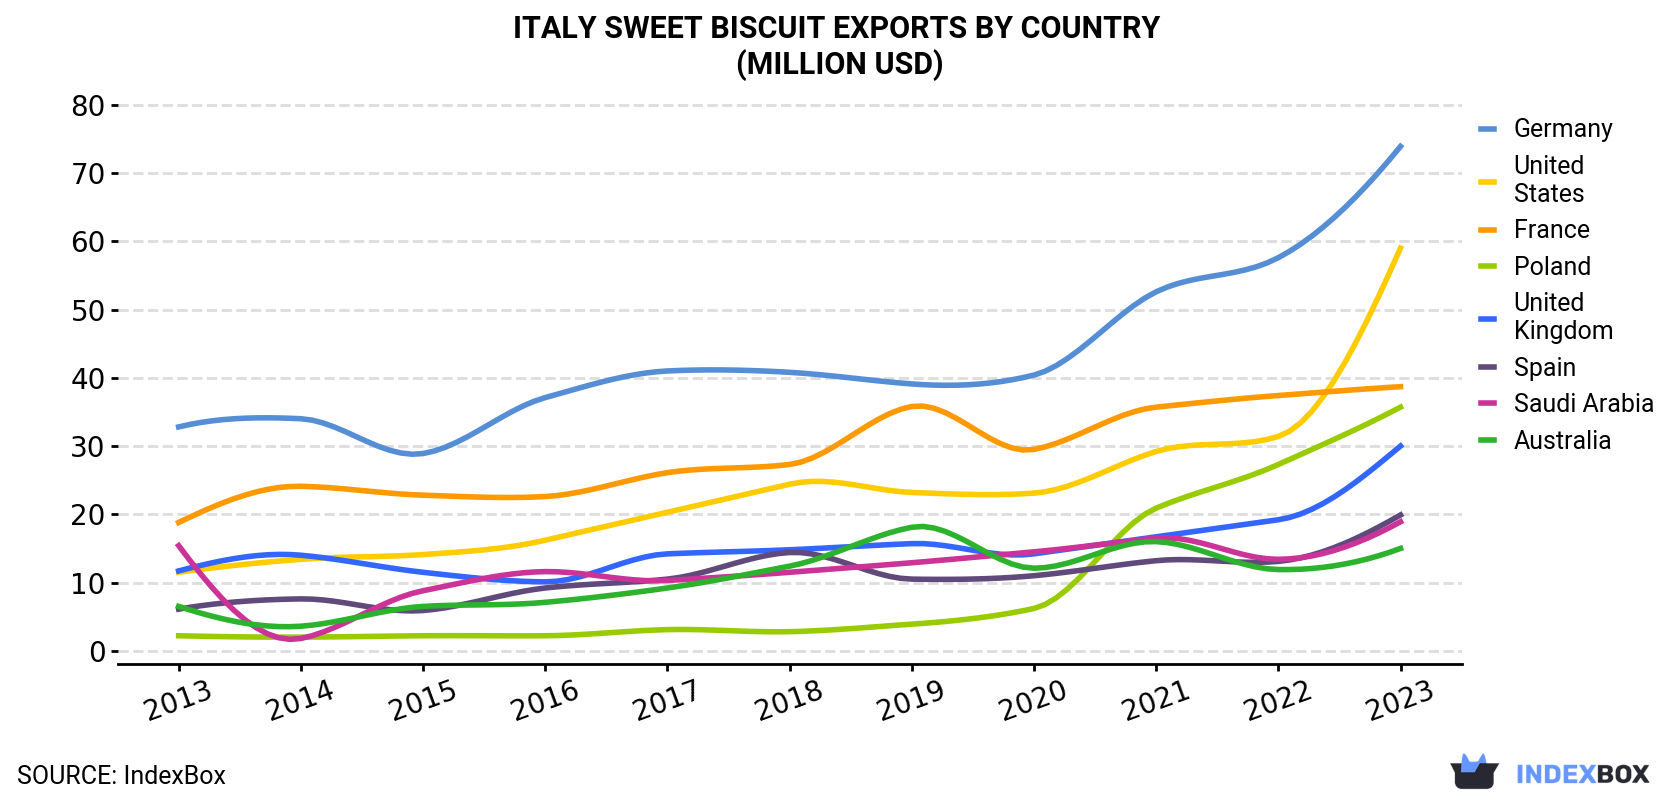 Italy Sweet Biscuit Exports By Country (Million USD)